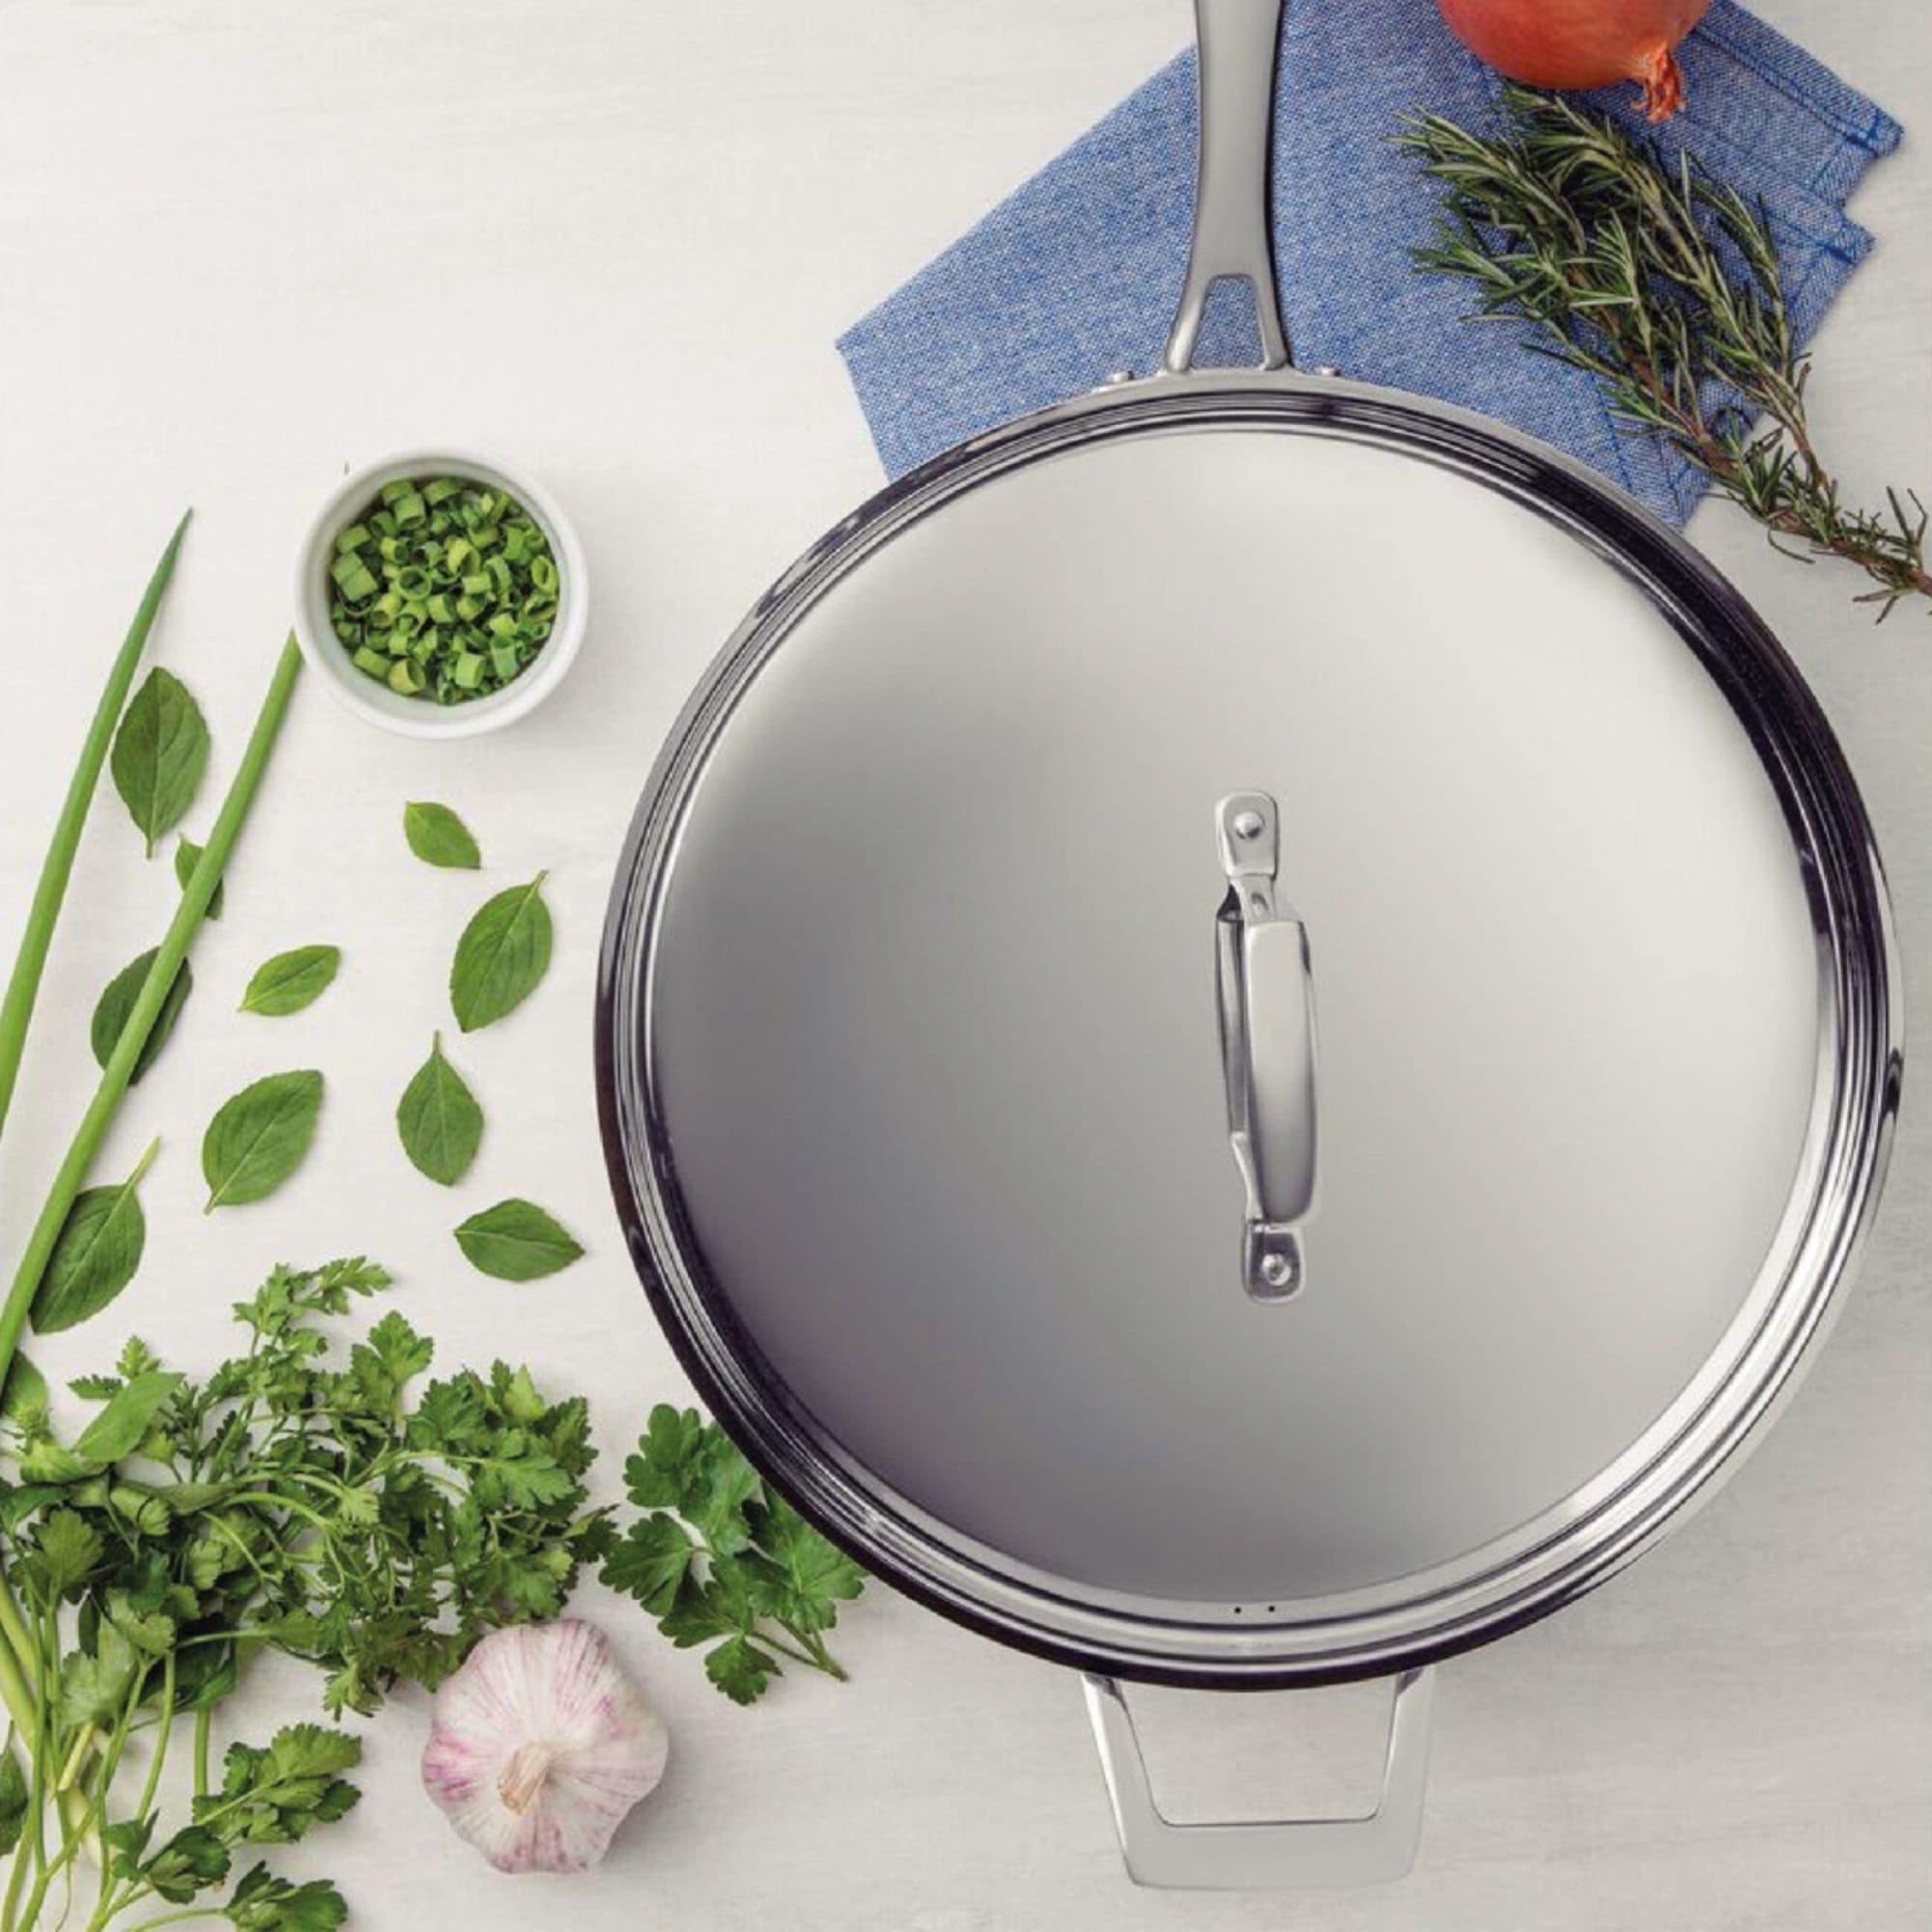 Tramontina Grano Collection Stainless Steel Saute Pan 30cm Image 3